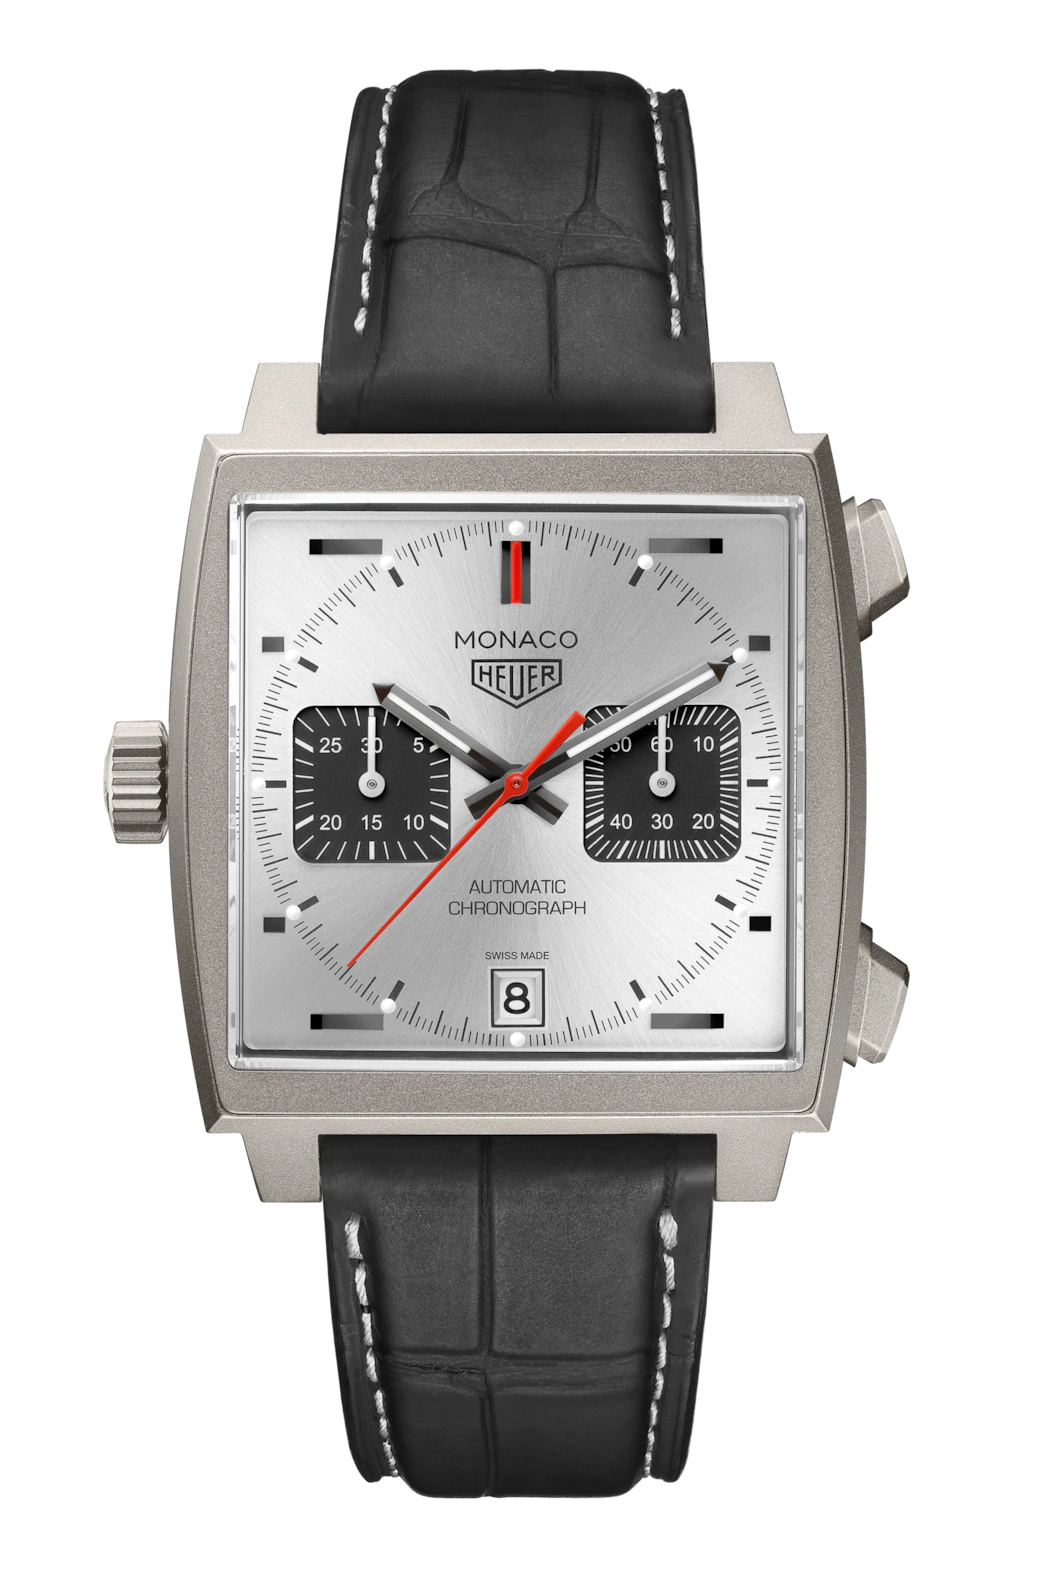 A steel watch with a bright grey face